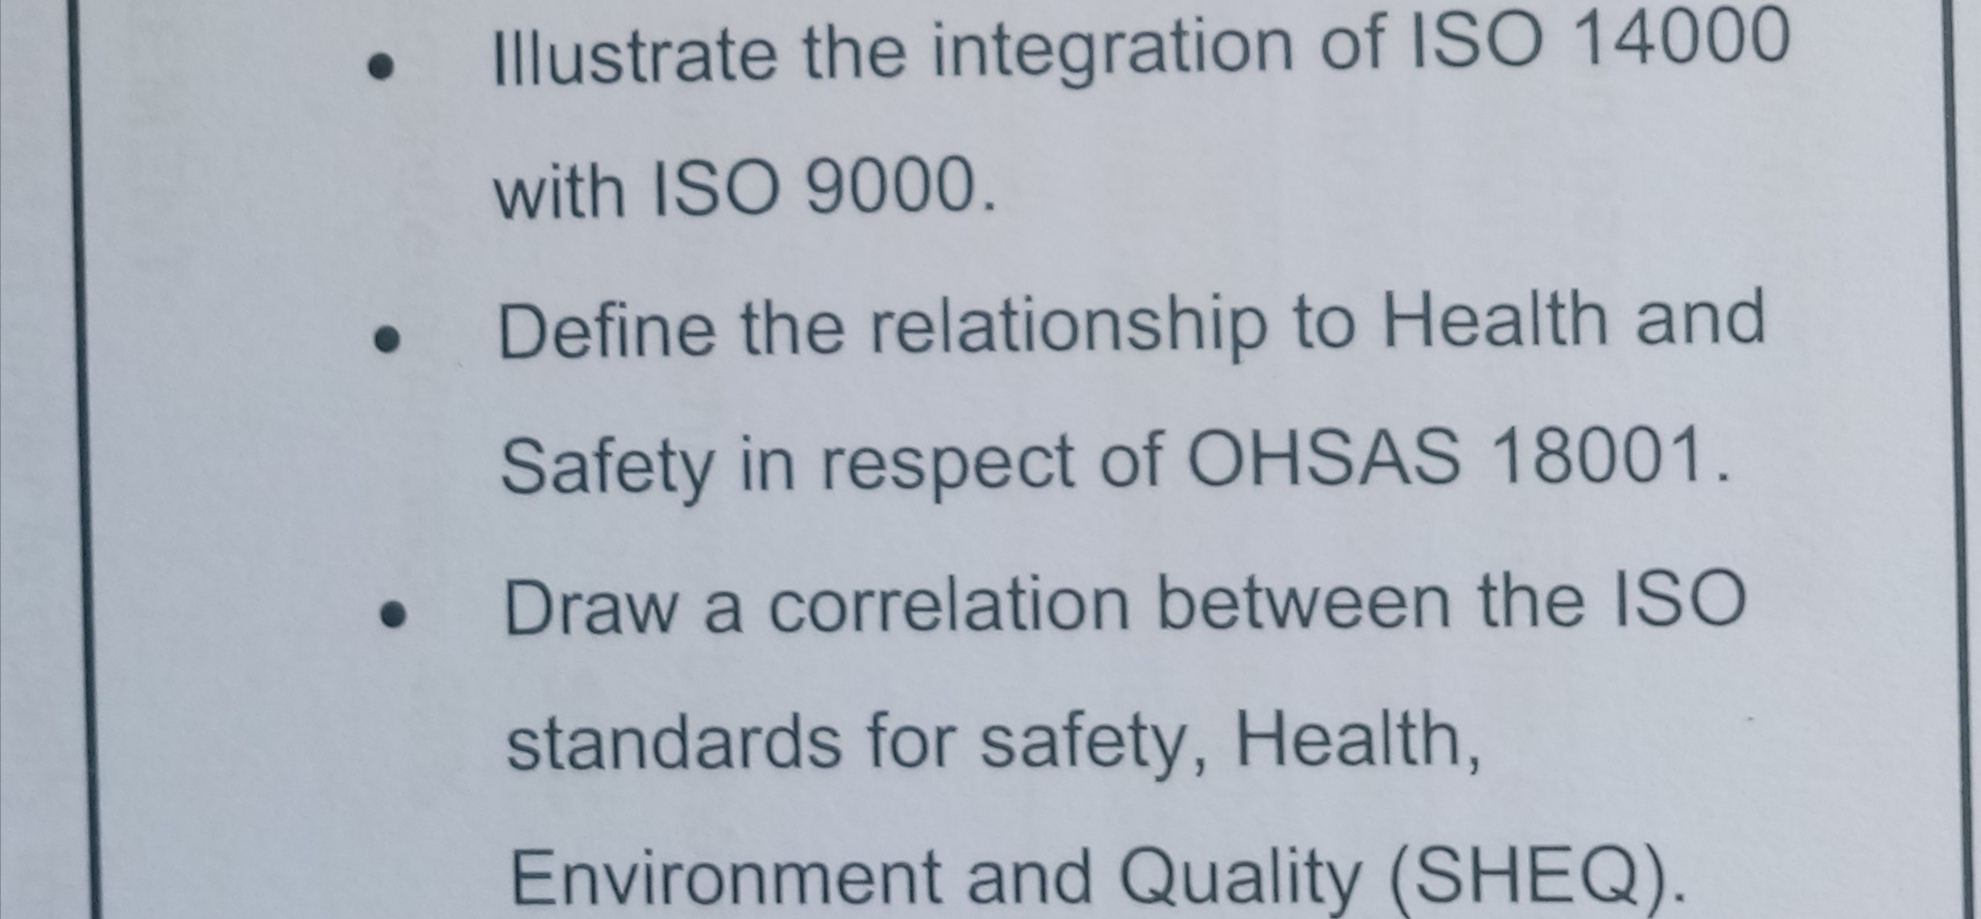 Illustrate the integration of ISO 14000 with ISO 9000.   Define the relationship to Health and Safety in